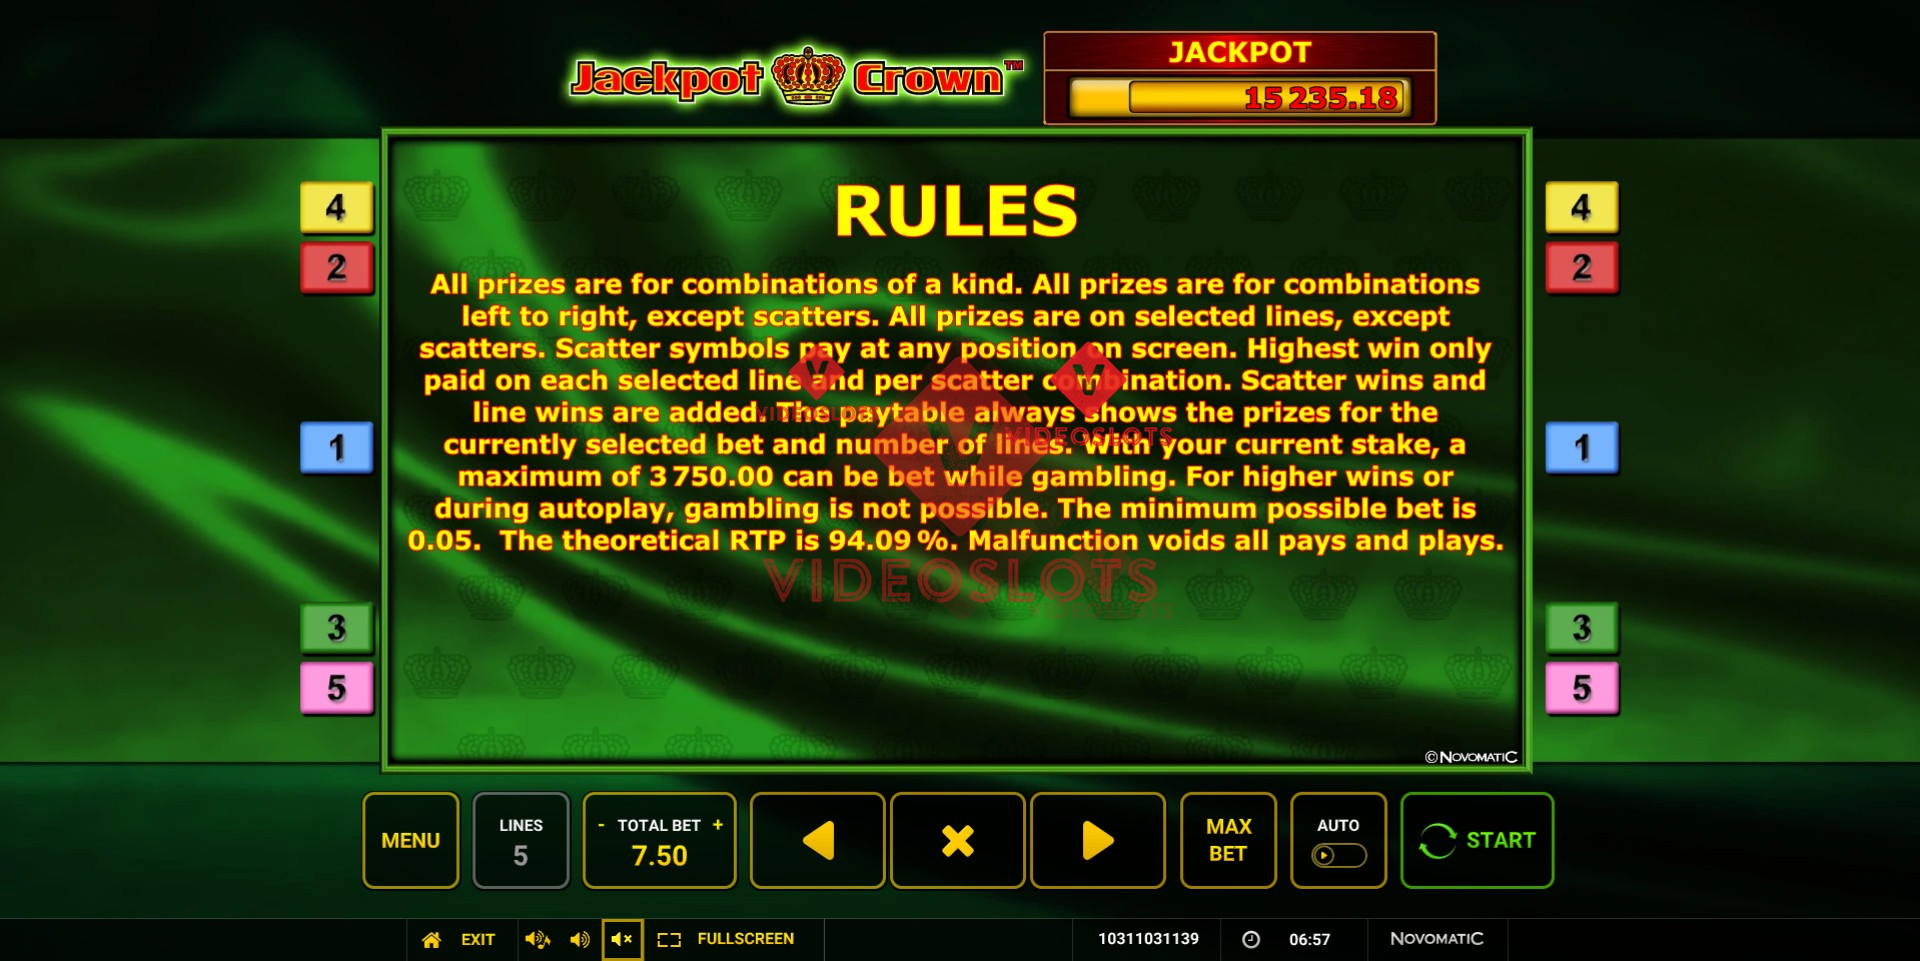 Game Rules for Jackpot Crown slot from Greentube